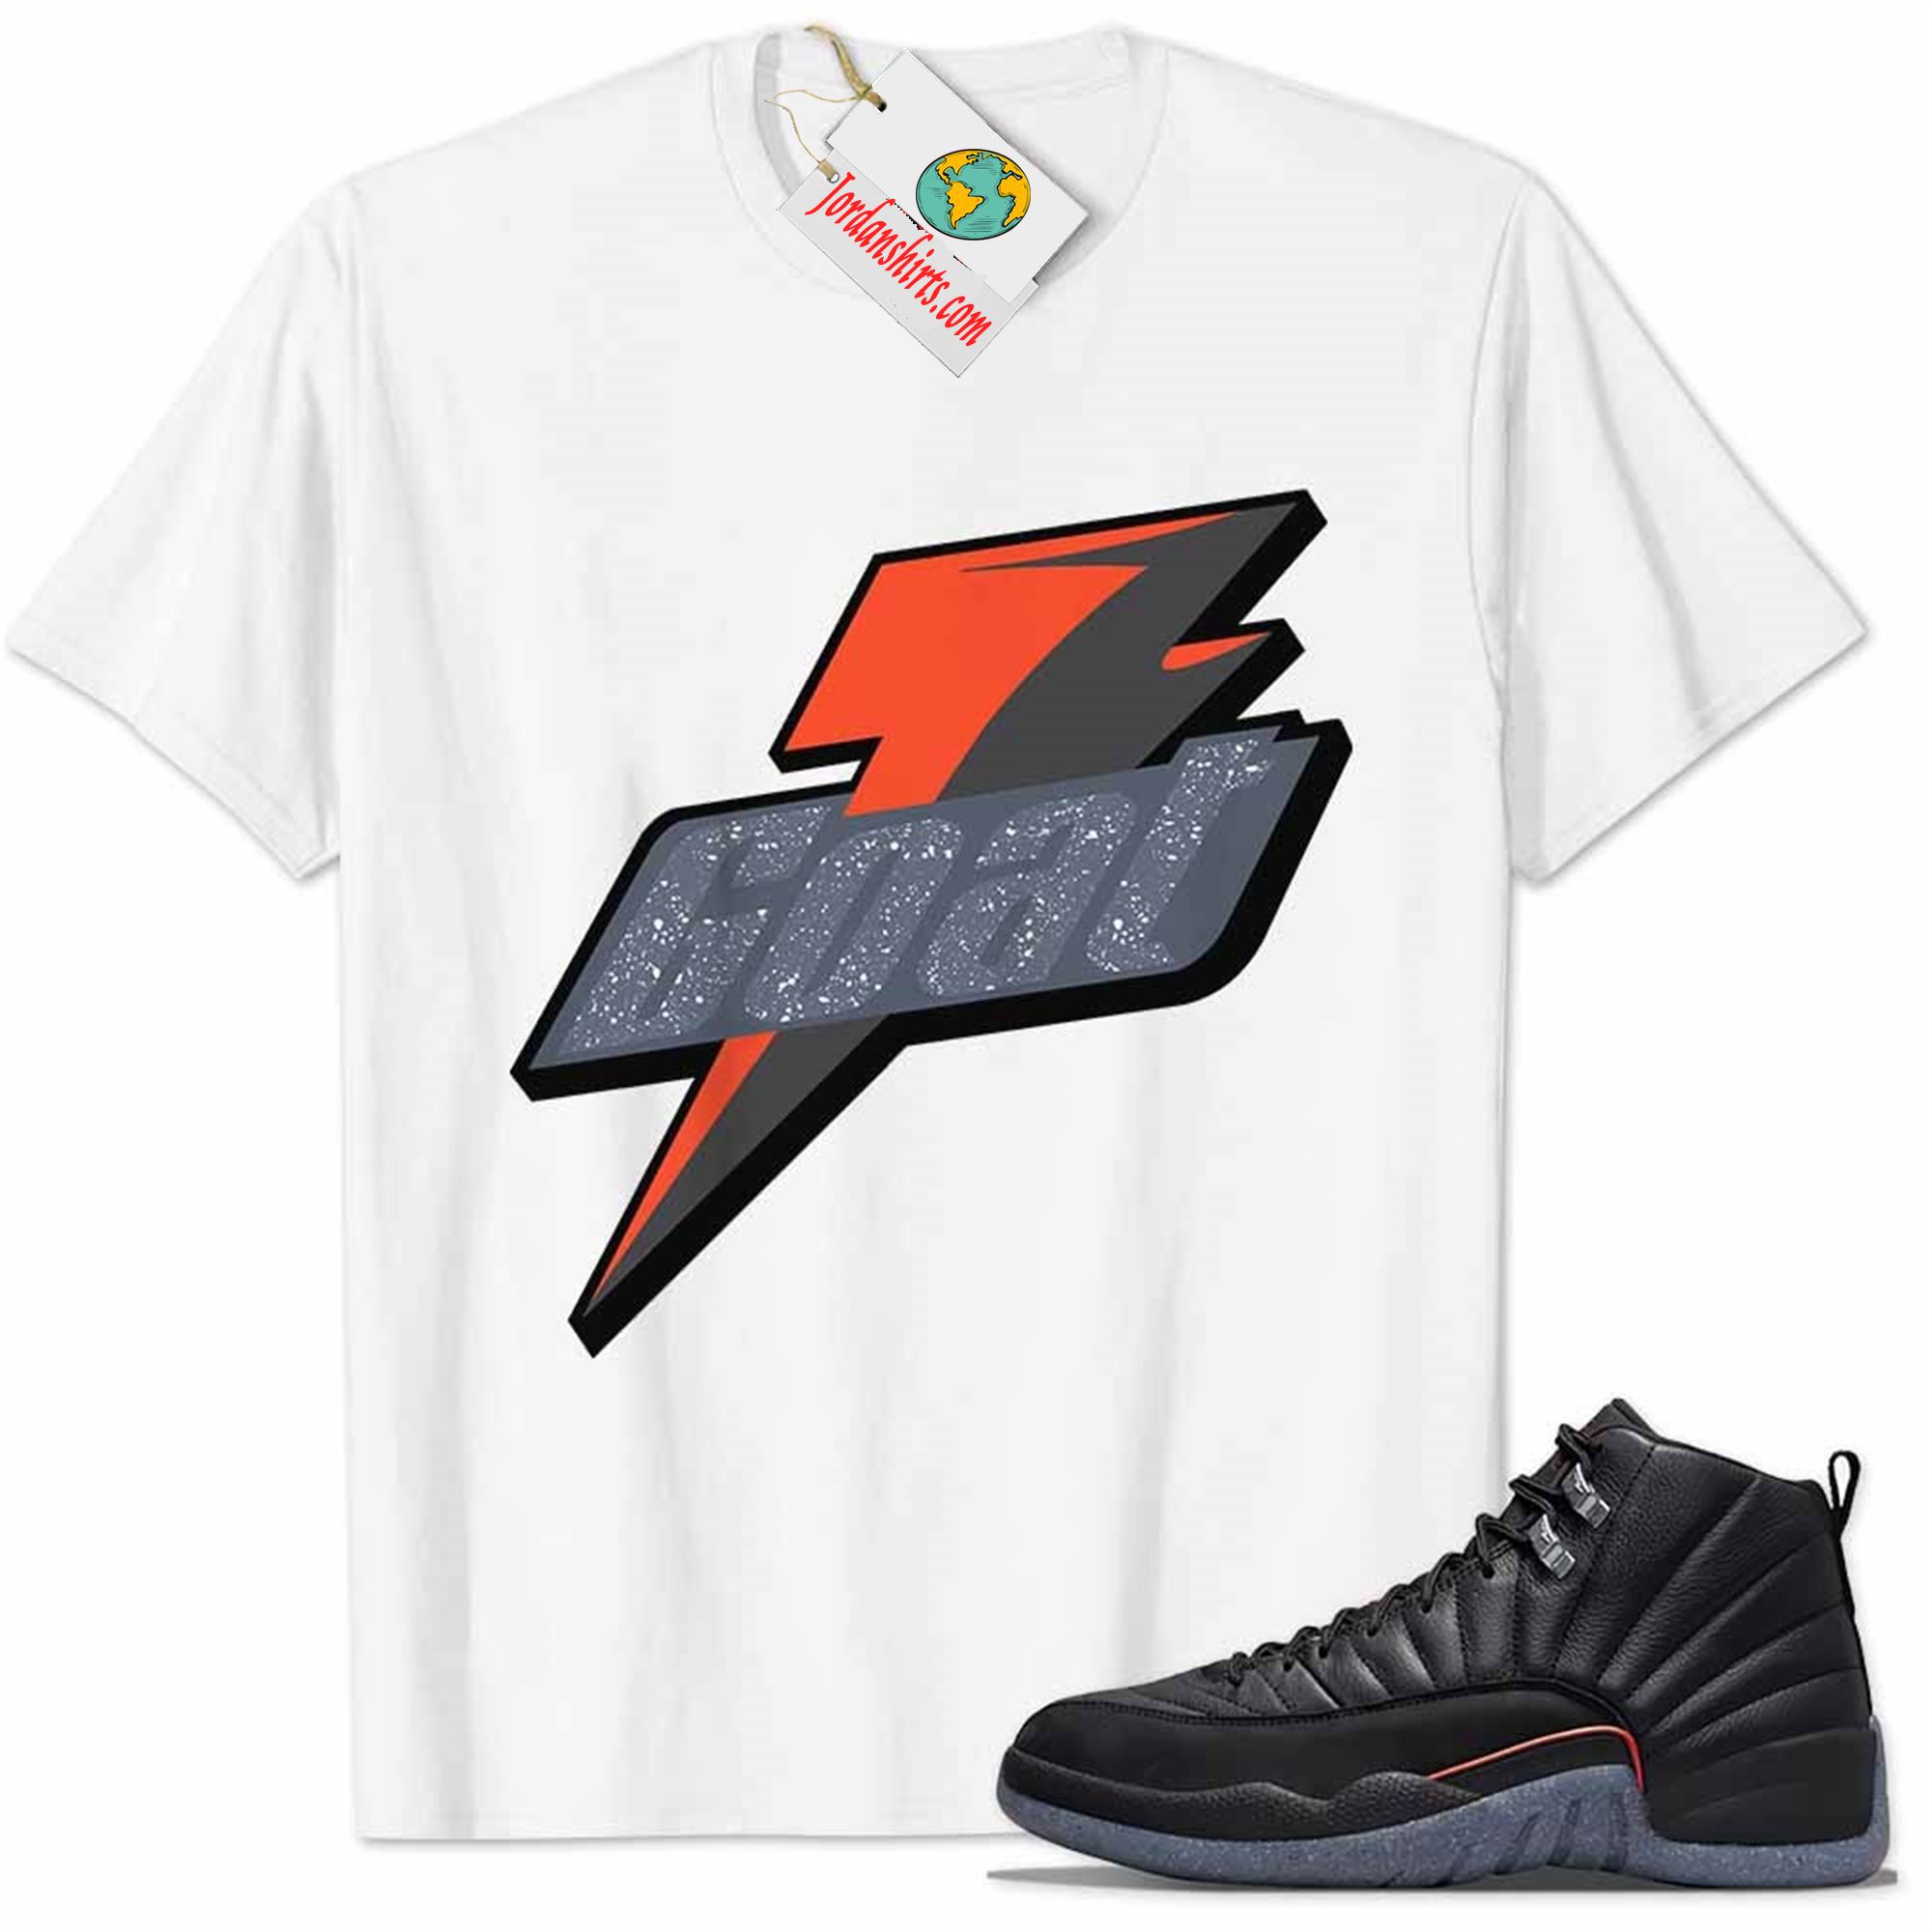 Jordan 12 Shirt, Utility Grind 12s Shirt Goat Greatest Of All Time White Full Size Up To 5xl